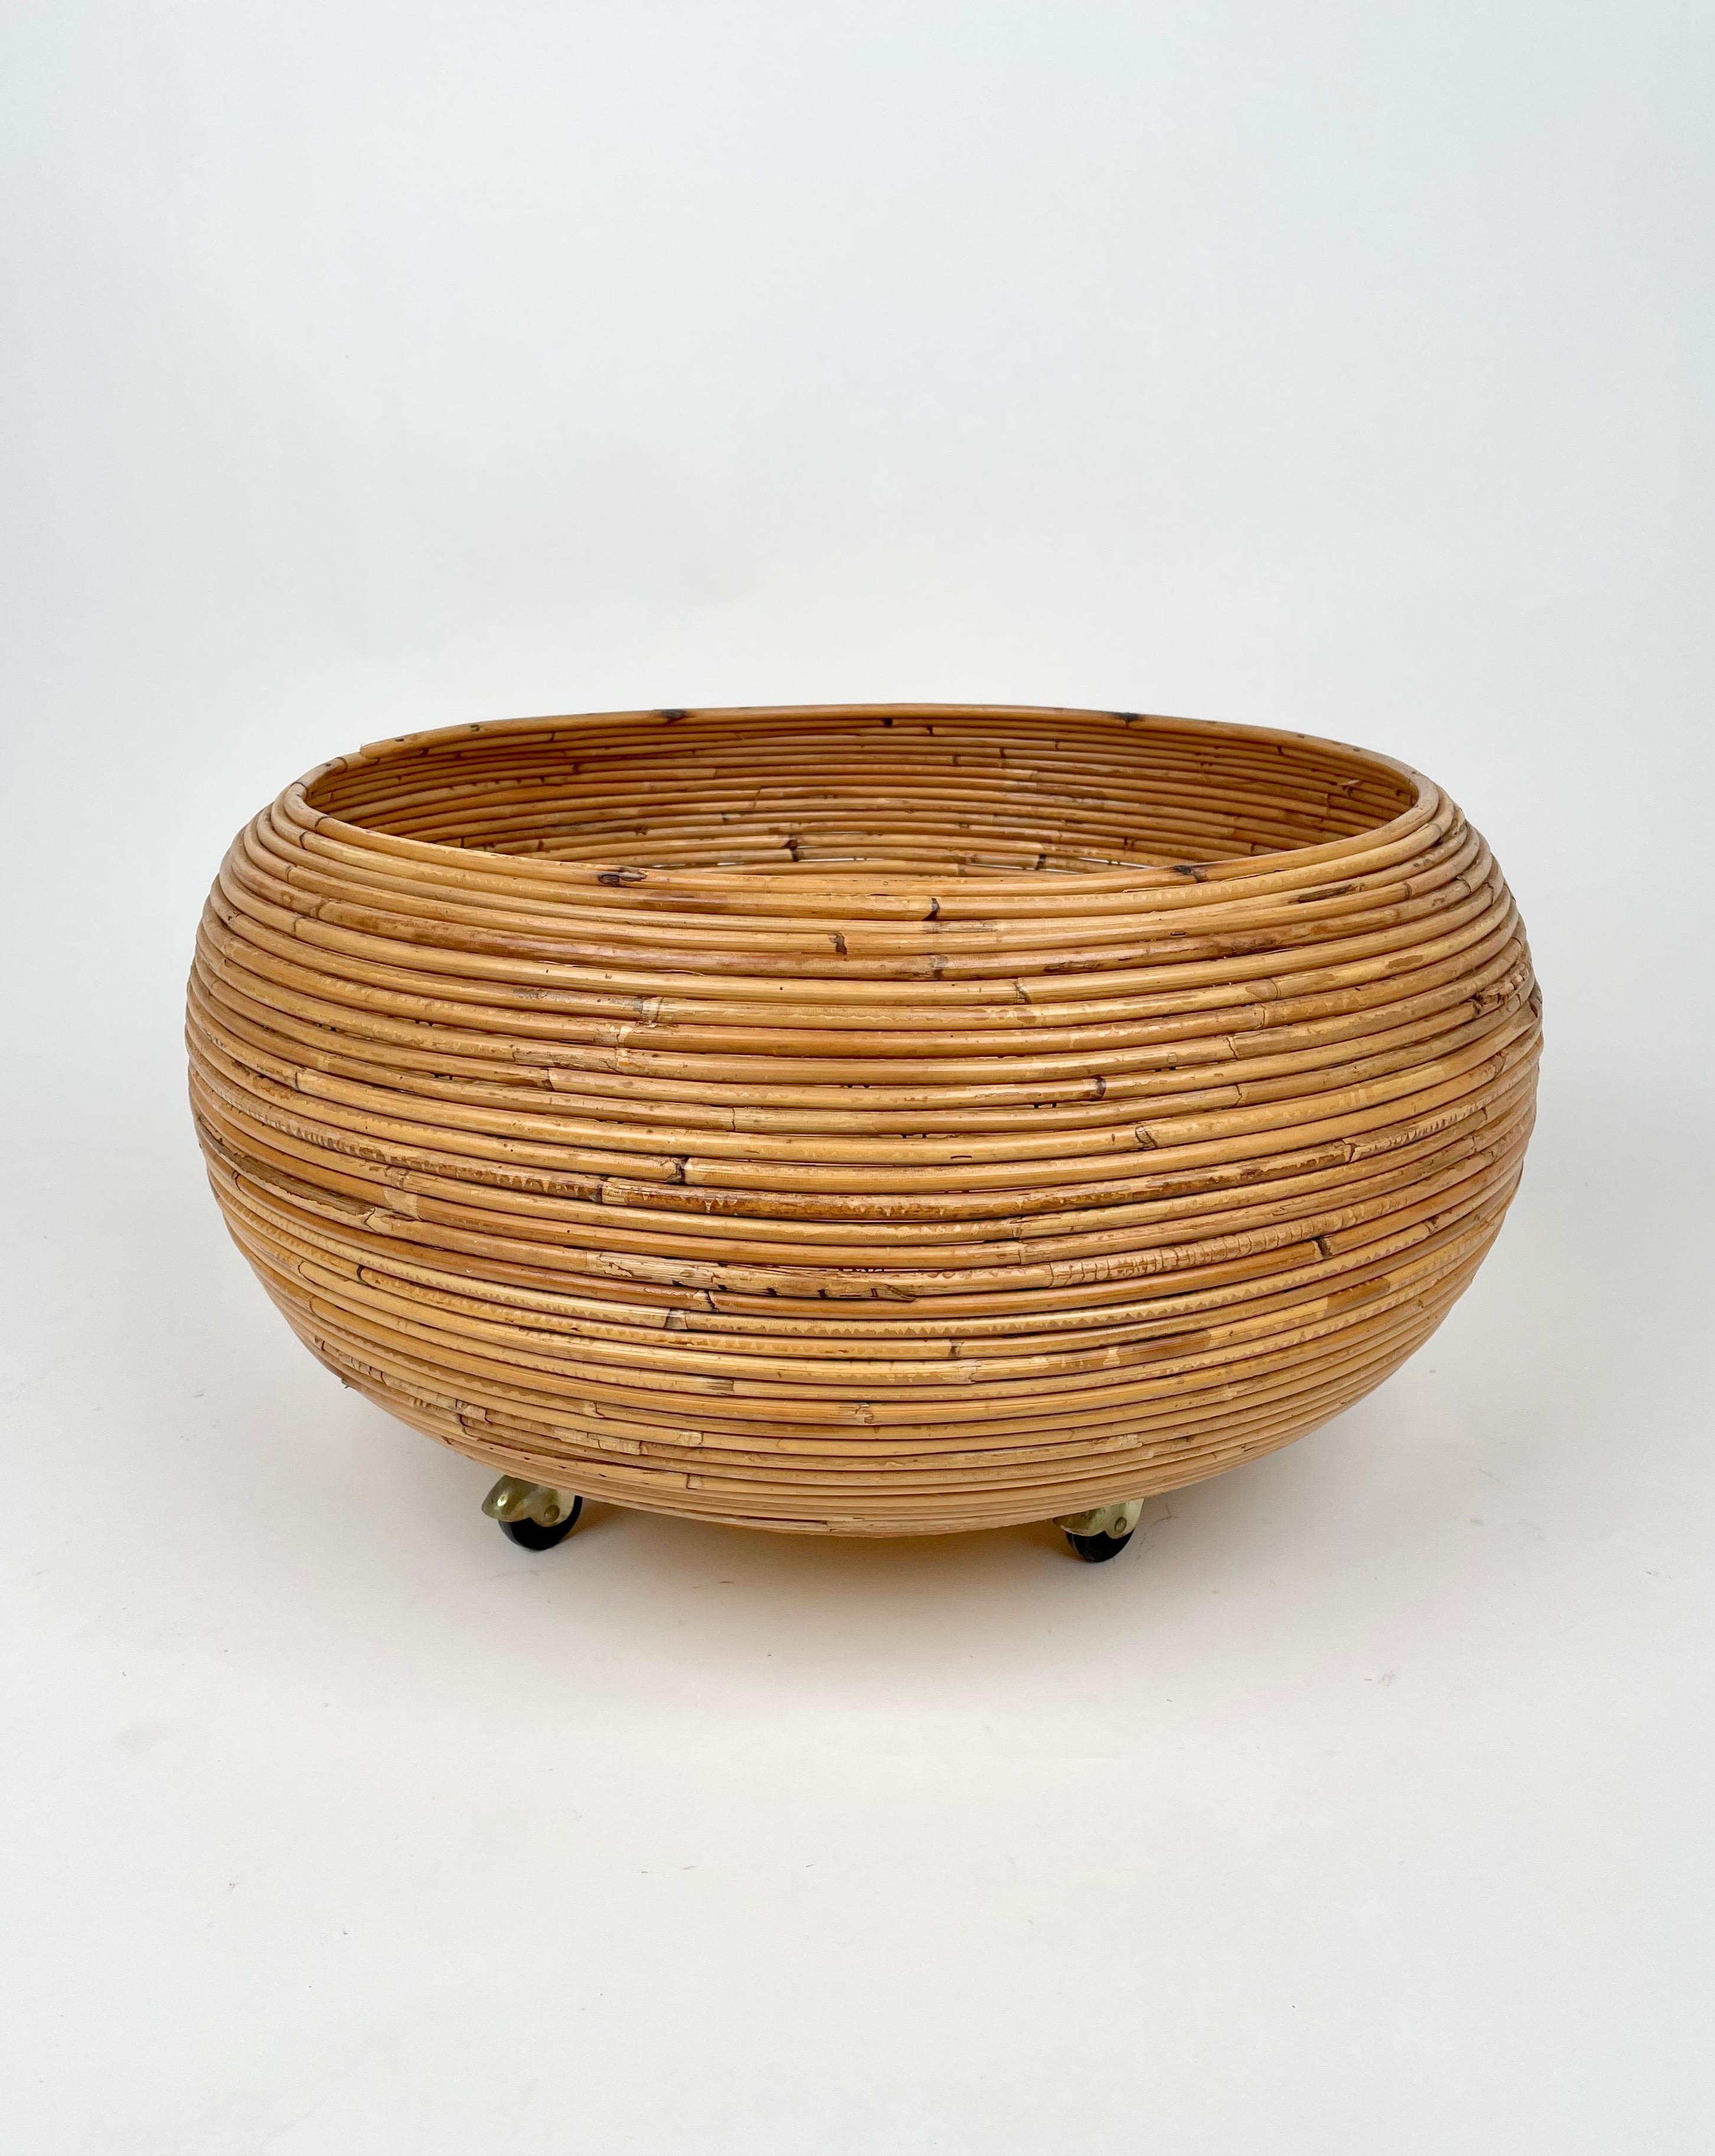 Round flower stand plant holder in rattan with wheels. Made in Italy in the 1960s.